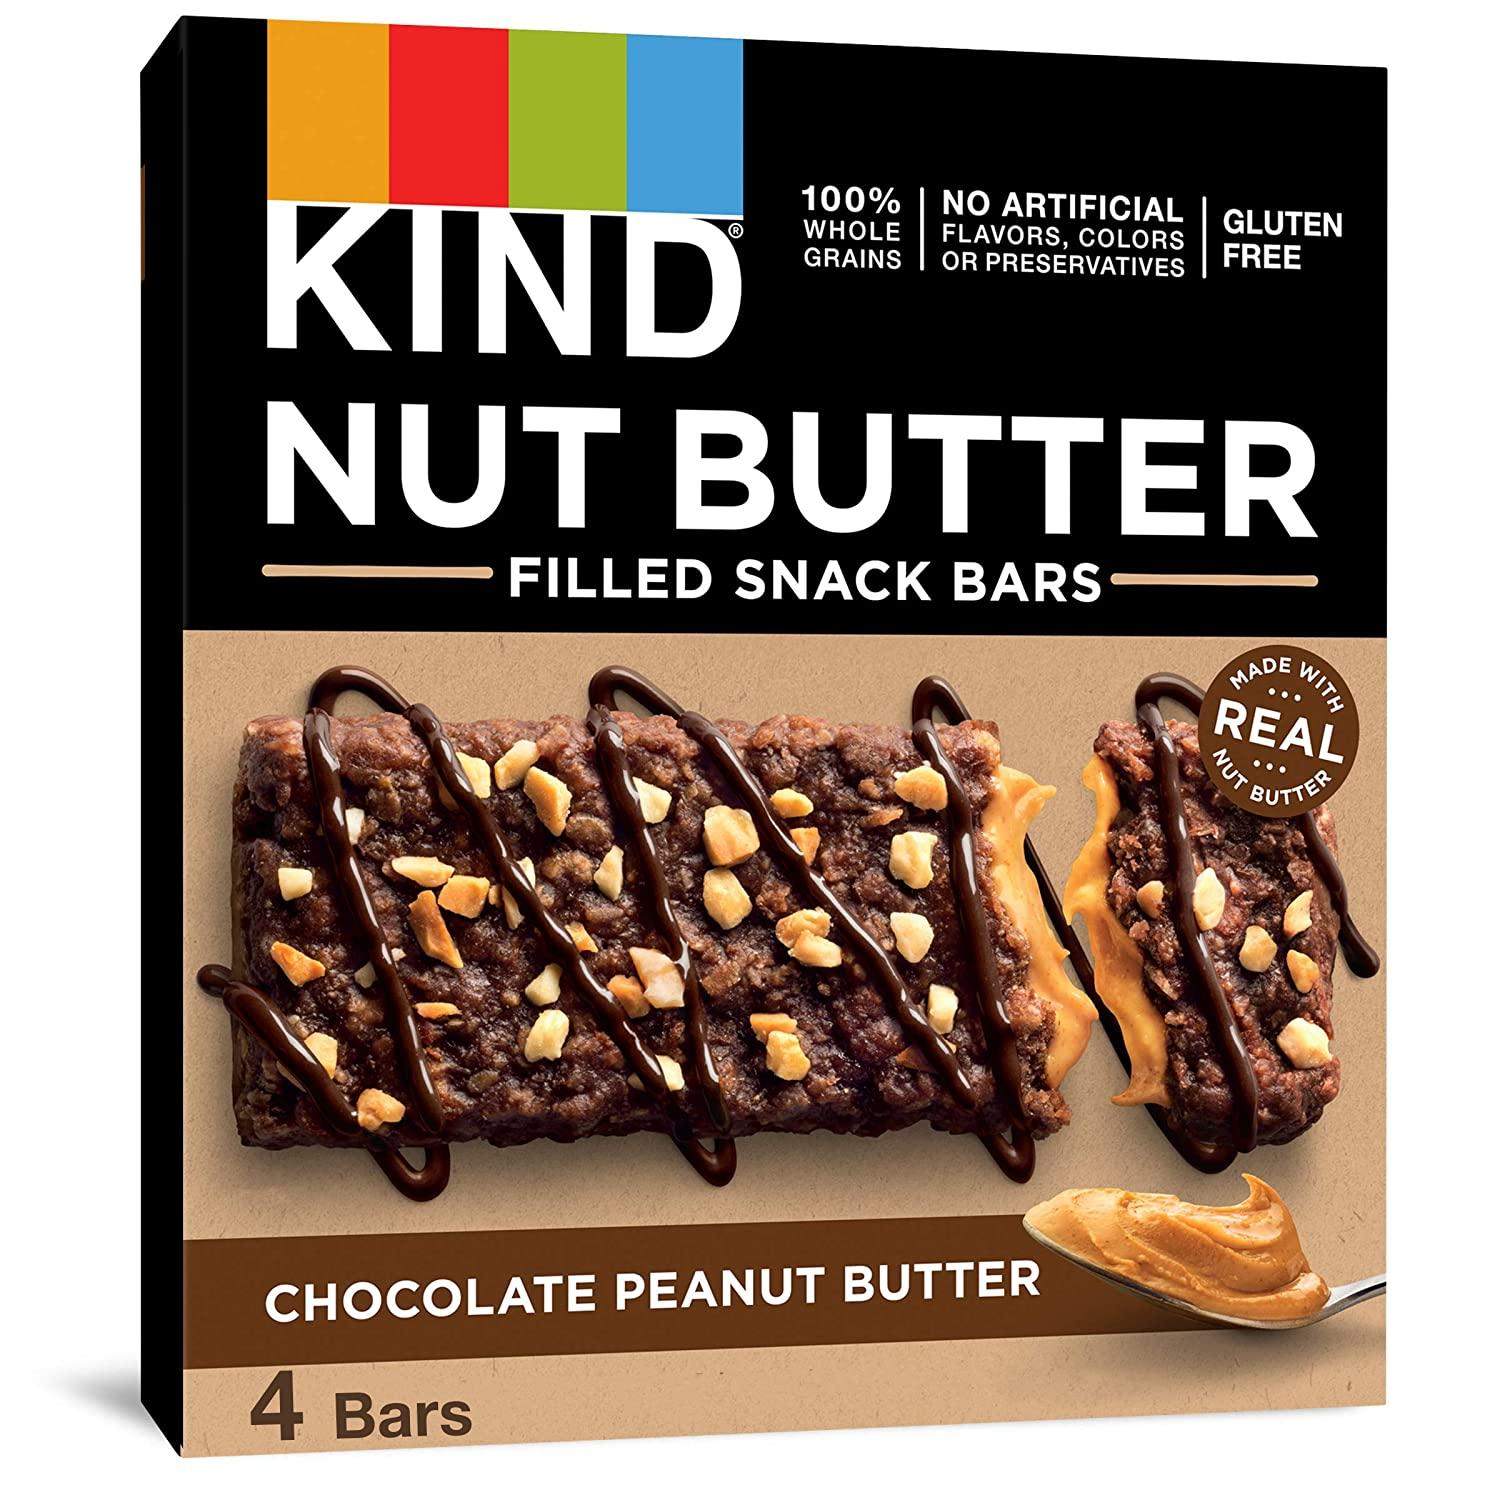 Kind Nut Chocolate Peanut Butter Bars 32 Count for $13.01